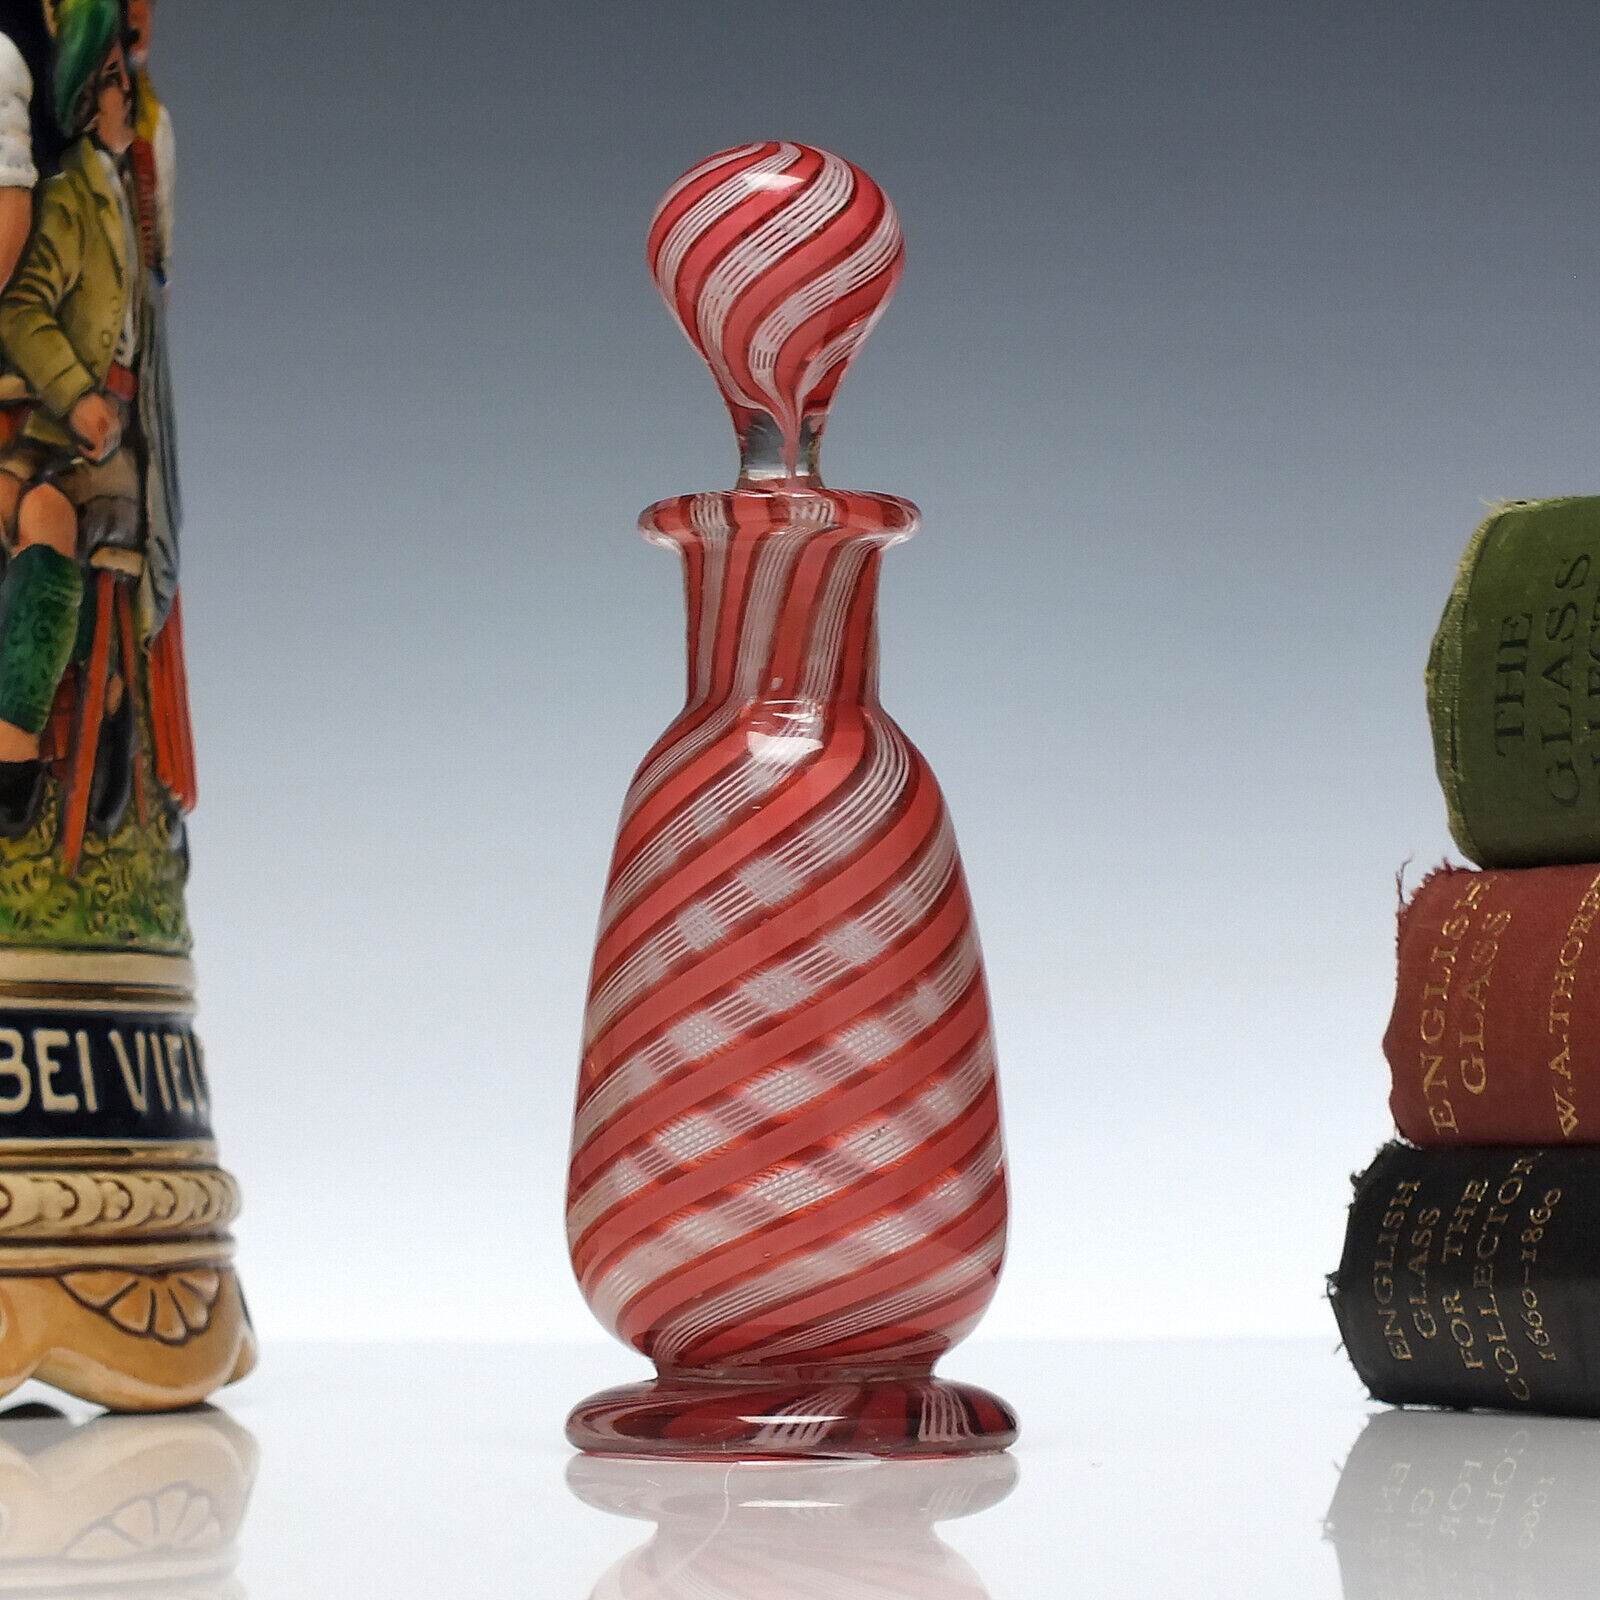 19th Century French Clichy Glass Perfume Bottle c1850